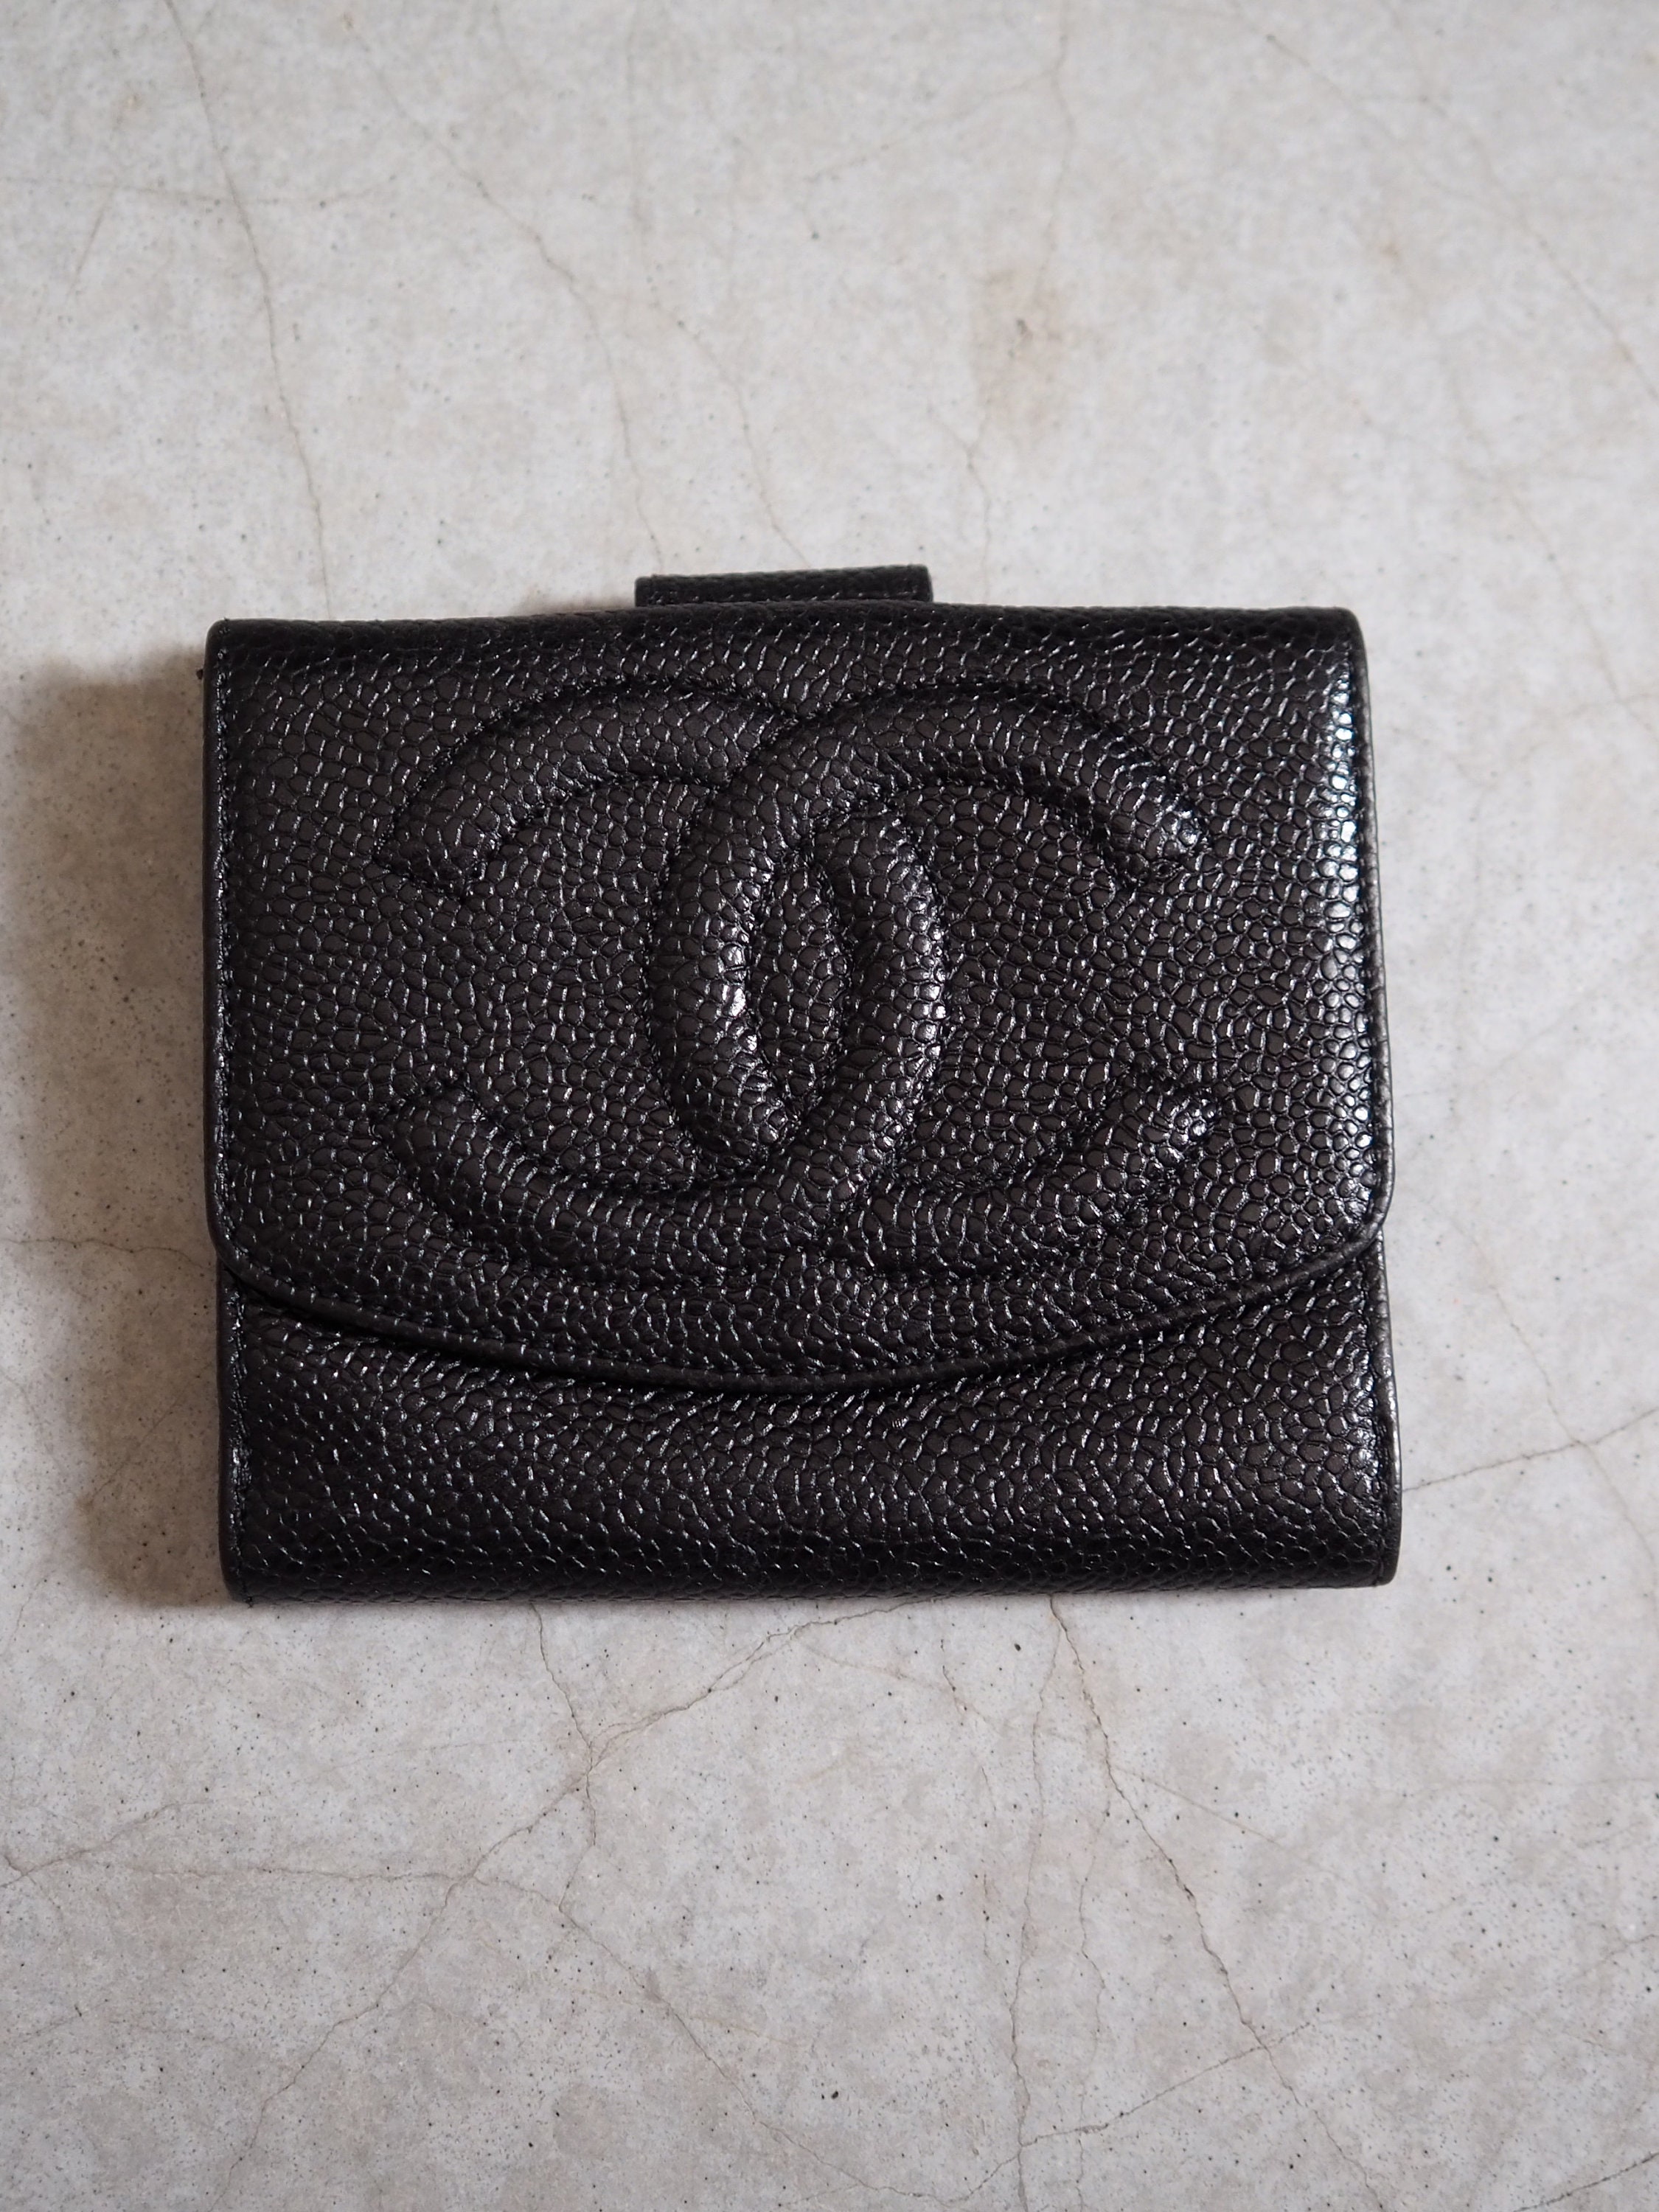 Custom painted Authentic Coco Chanel long wallet. Vintage Wallet